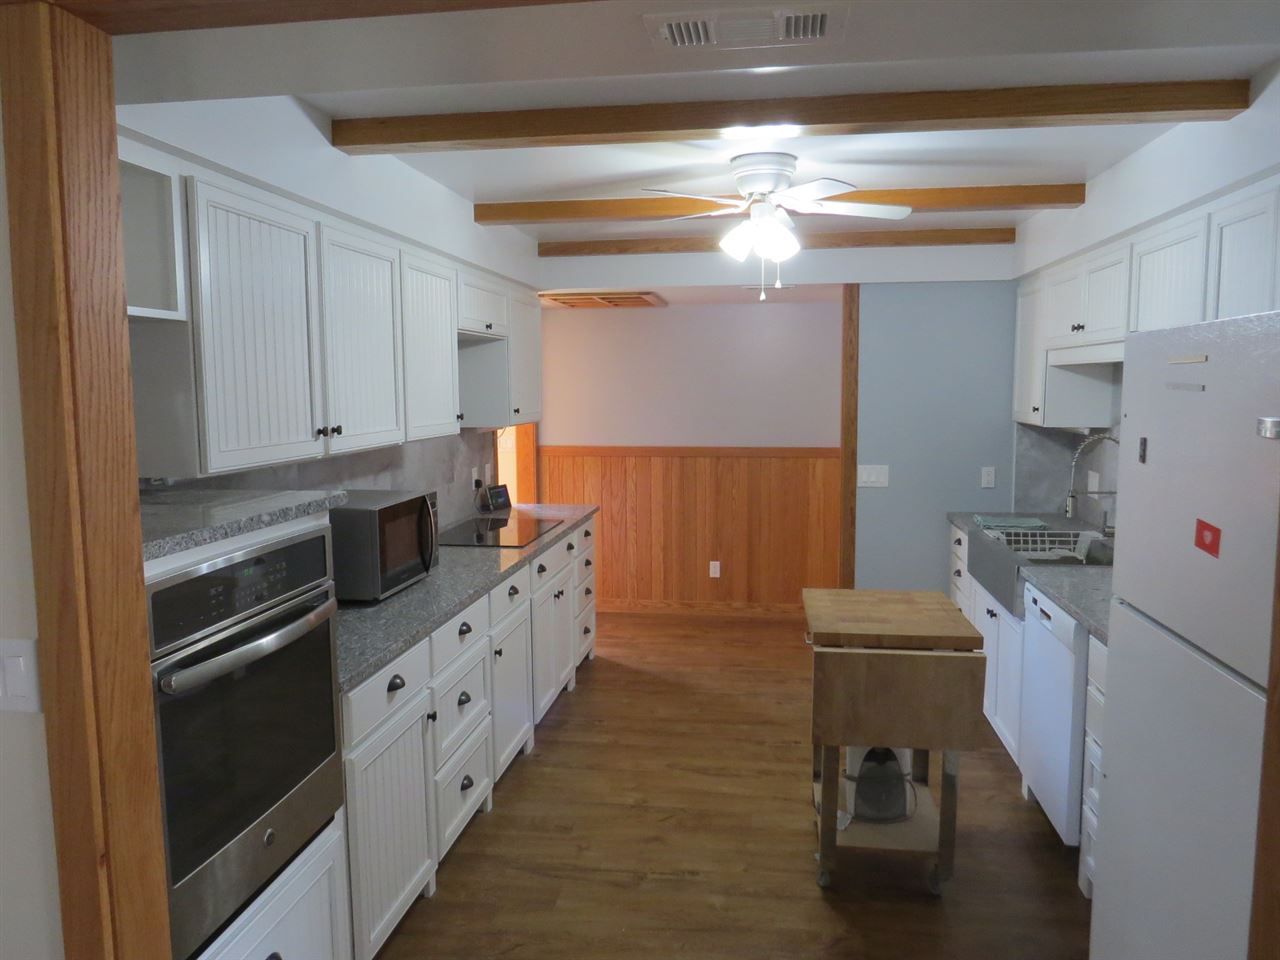 a kitchen with granite countertop a refrigerator a stove a sink and dishwasher